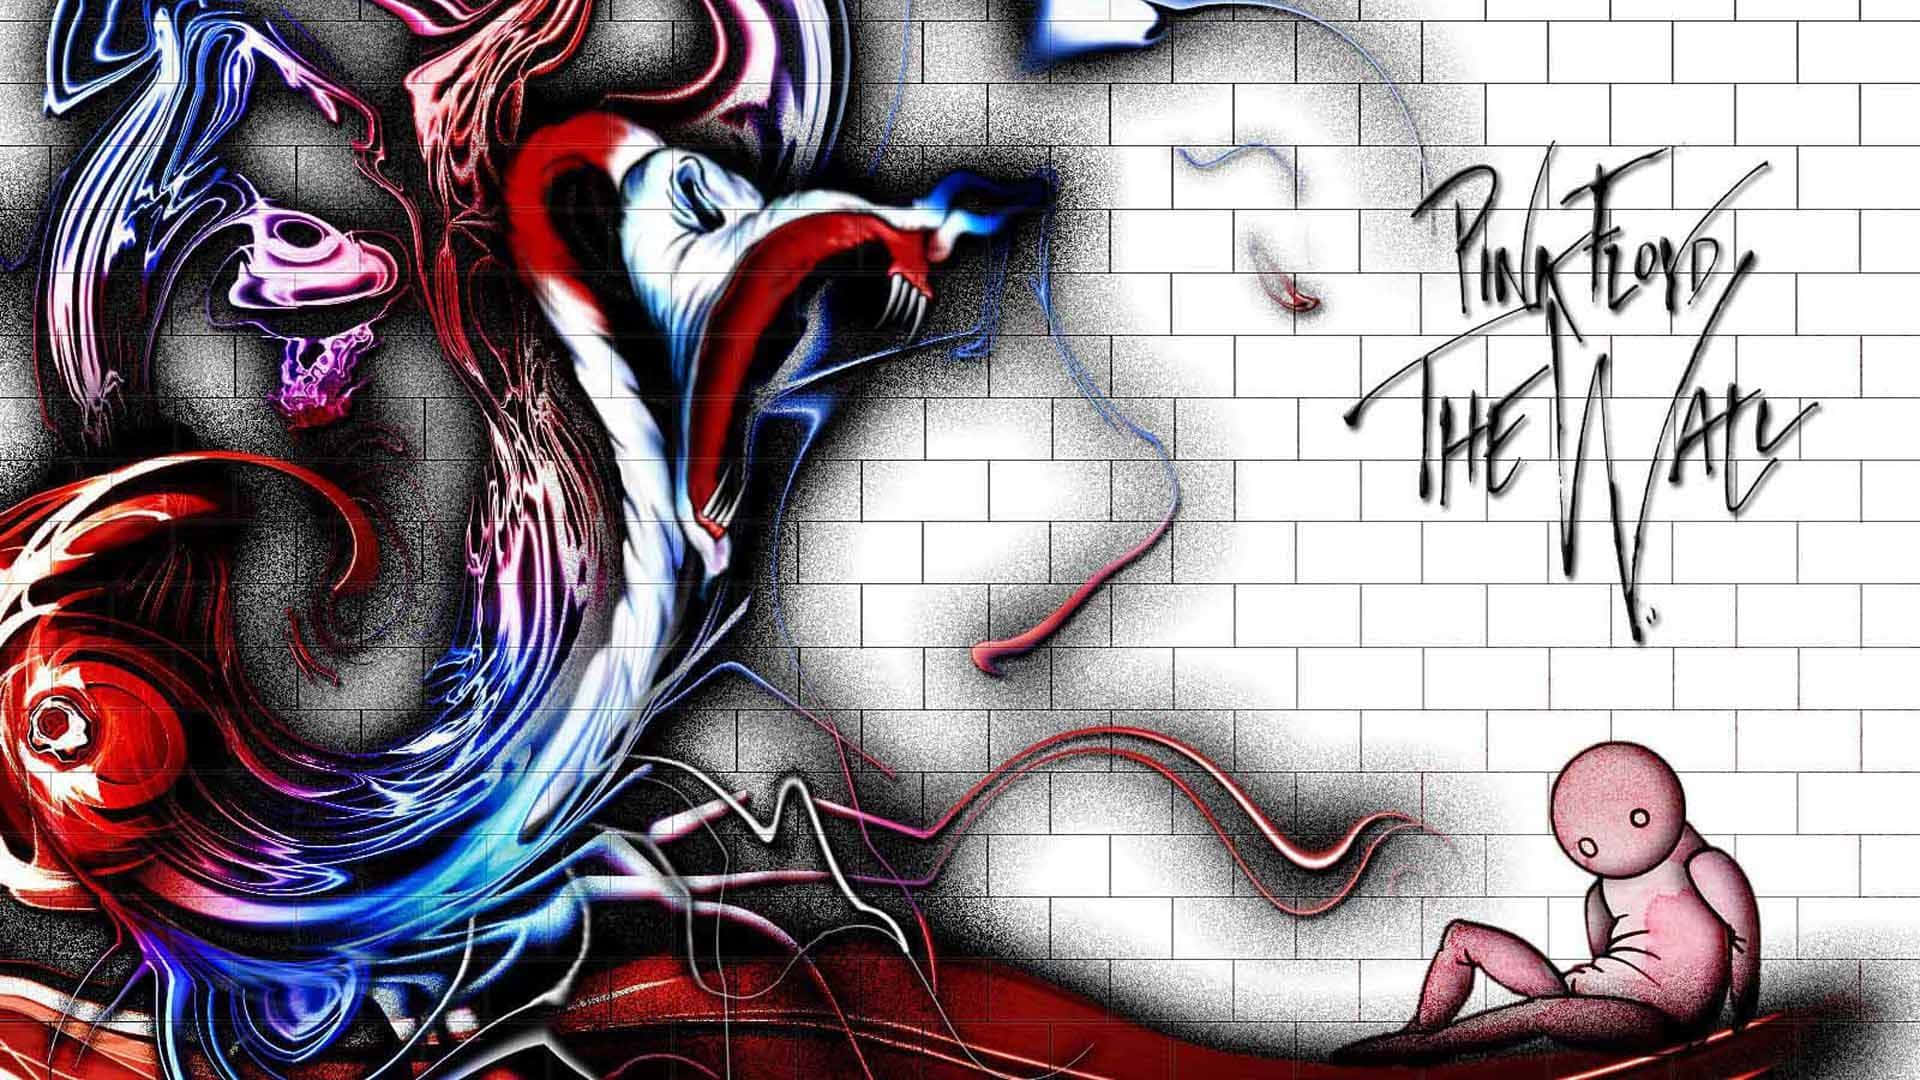 A tribute to the classic rock opera "The Wall" by Pink Floyd. Wallpaper